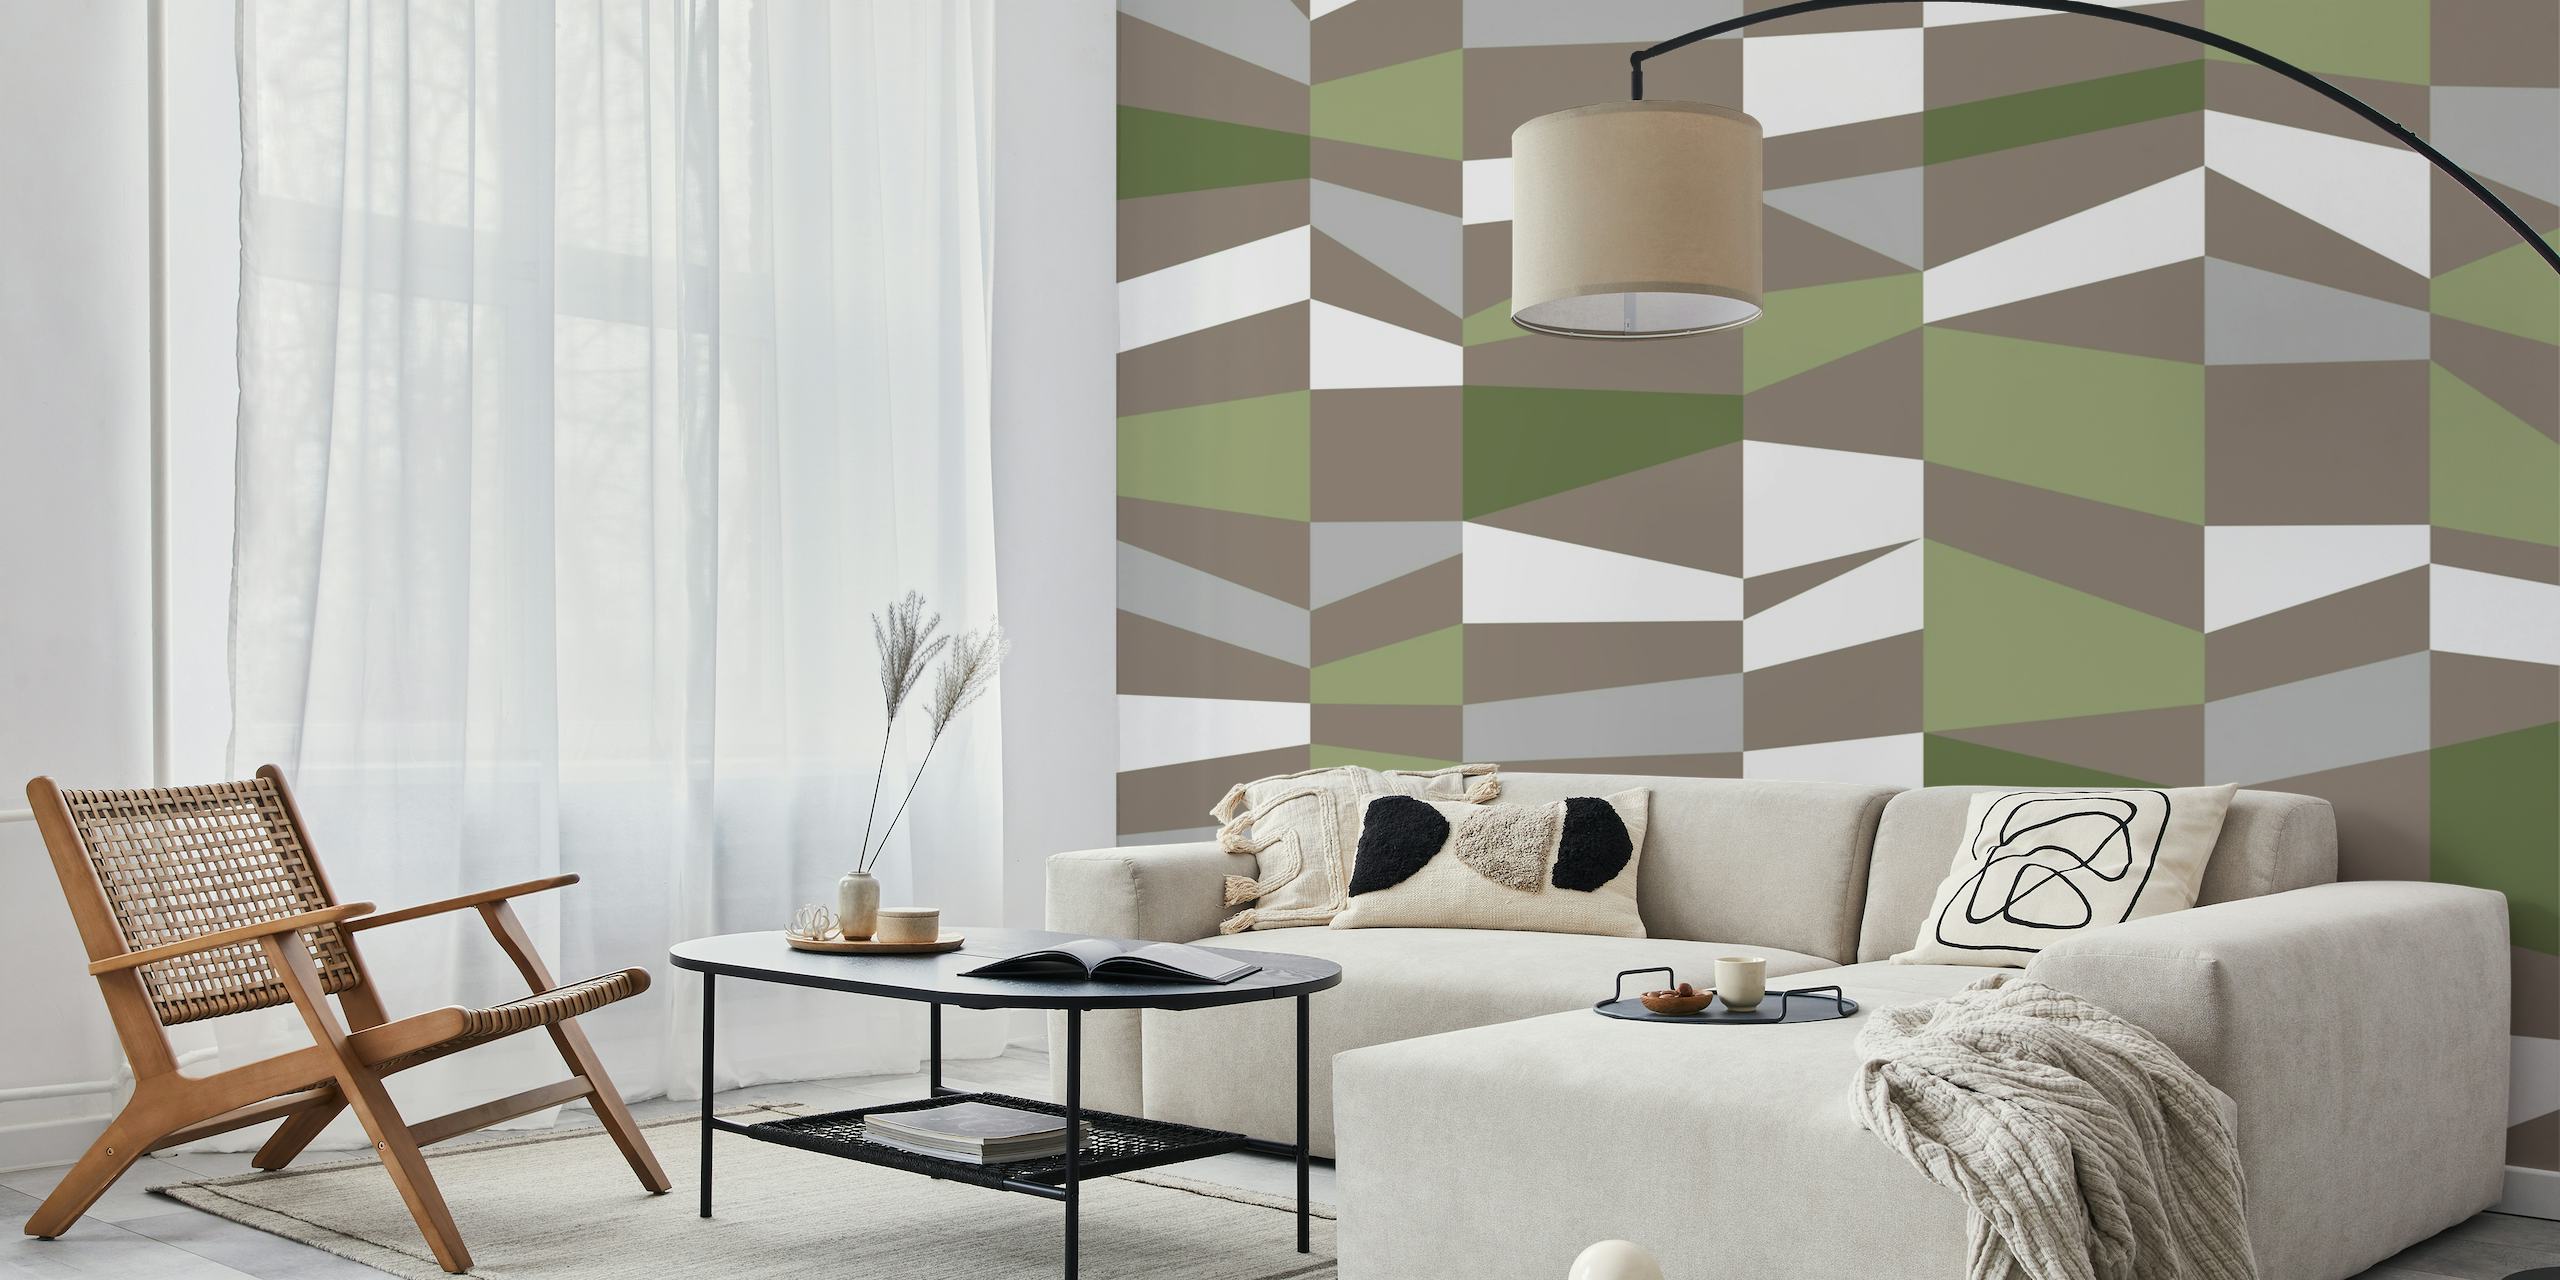 Scandinavian Color Blocks Sage wall mural with geometric shapes in sage green, white, and grey tones